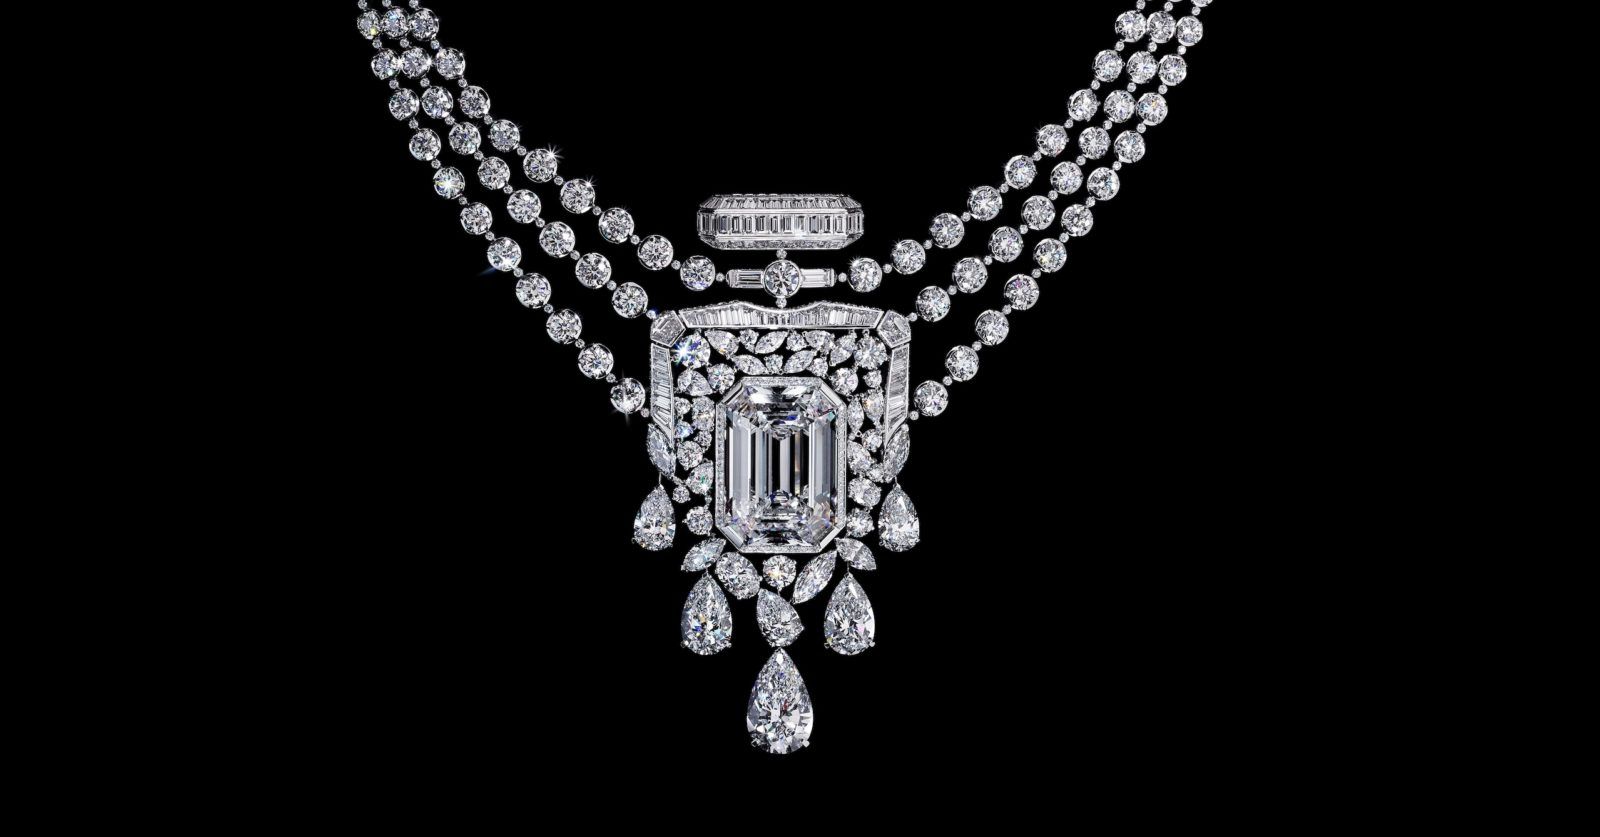 Chanel’s 55.55-carat diamond necklace is a tribute to the No 5 perfume